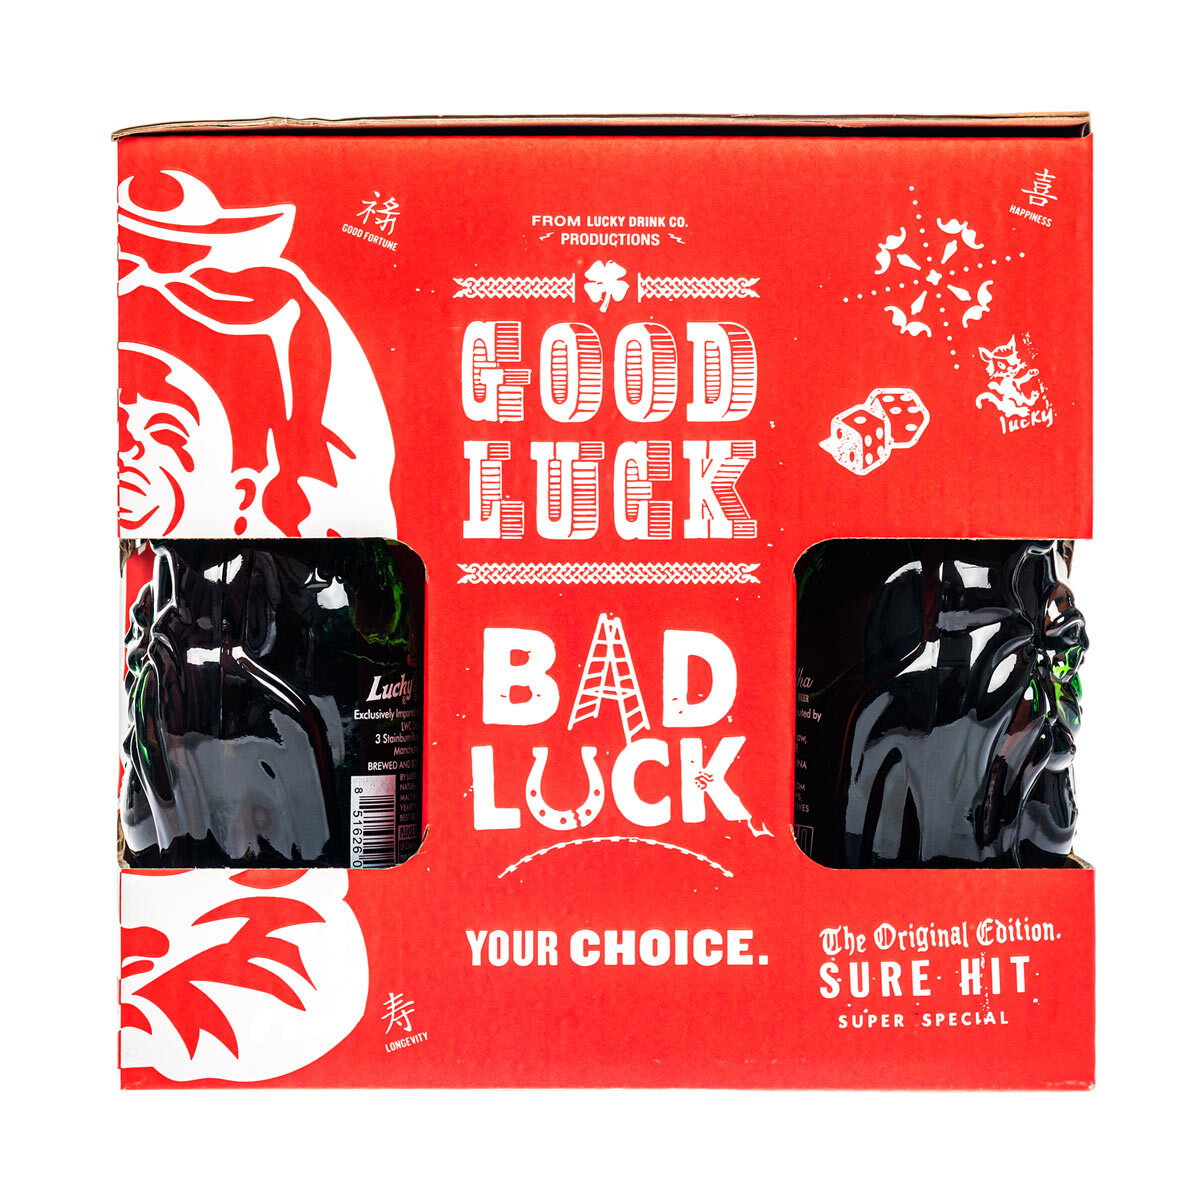 Lucky Buddha Gift Pack 6 x 330ml With 2 Glasses